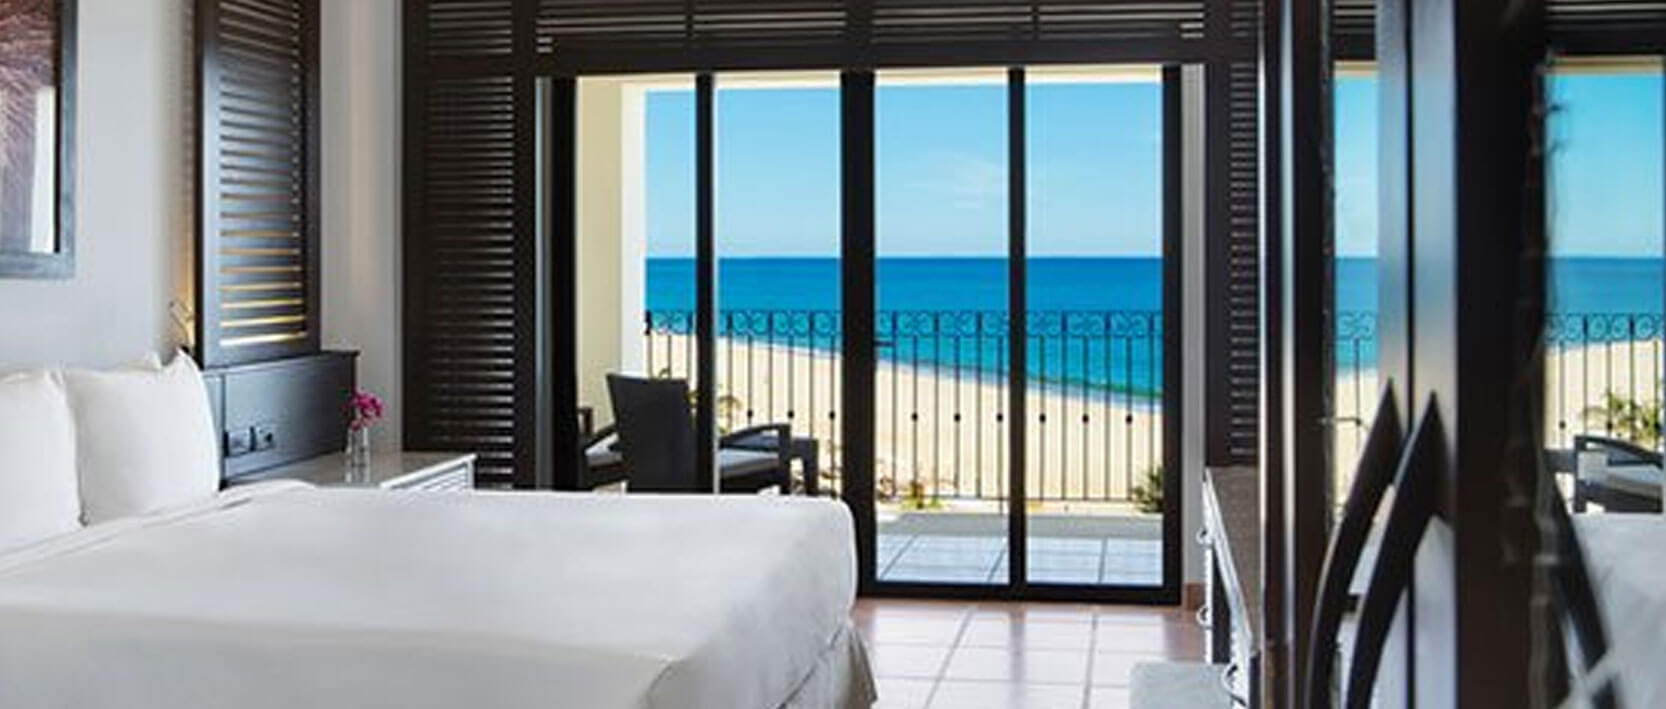 Hyatt Ziva Los Cabos Accommodations - Club Oceanfront King or Double